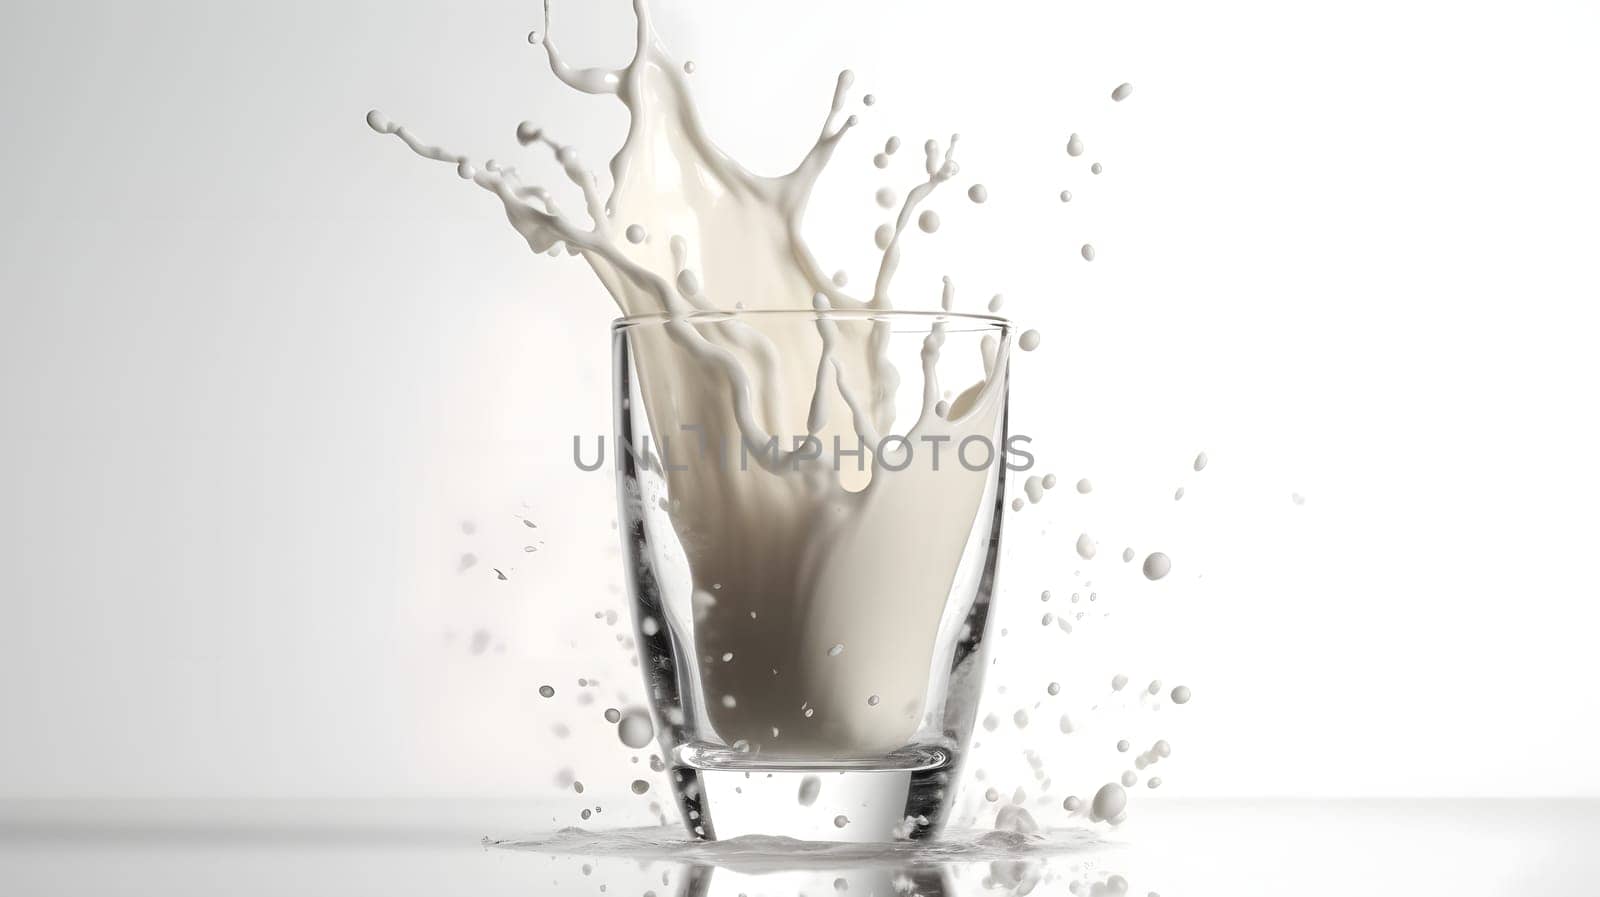 glass of milk with crown of splashes on white background, neural network generated image by z1b